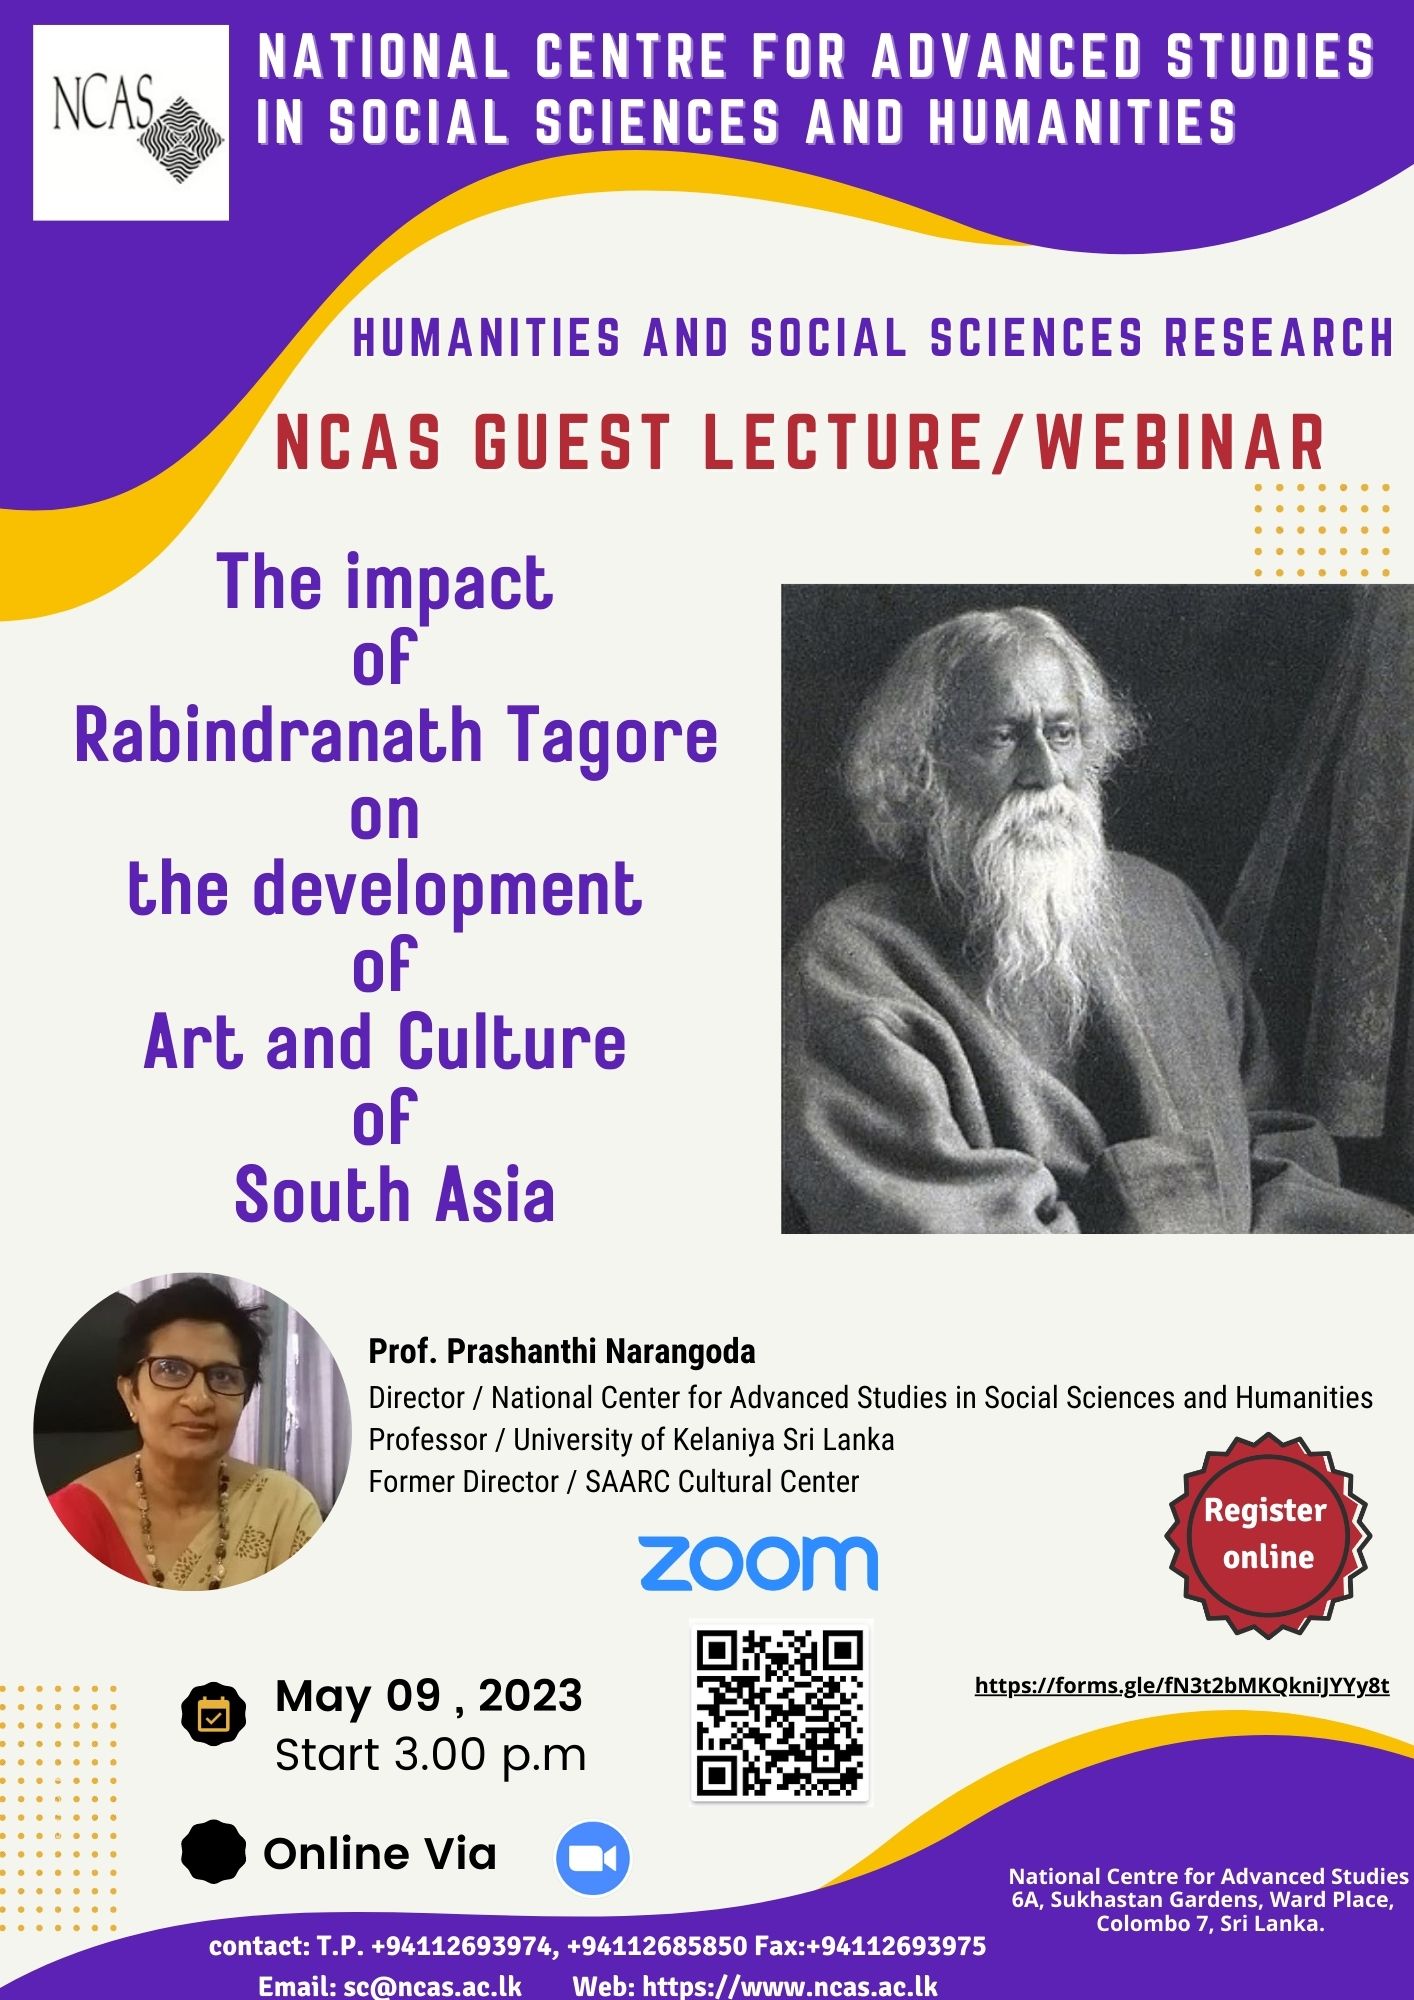 Guest Lecture on The impact of Rabindranath Tagore on the development of Art and Culture of South Asia